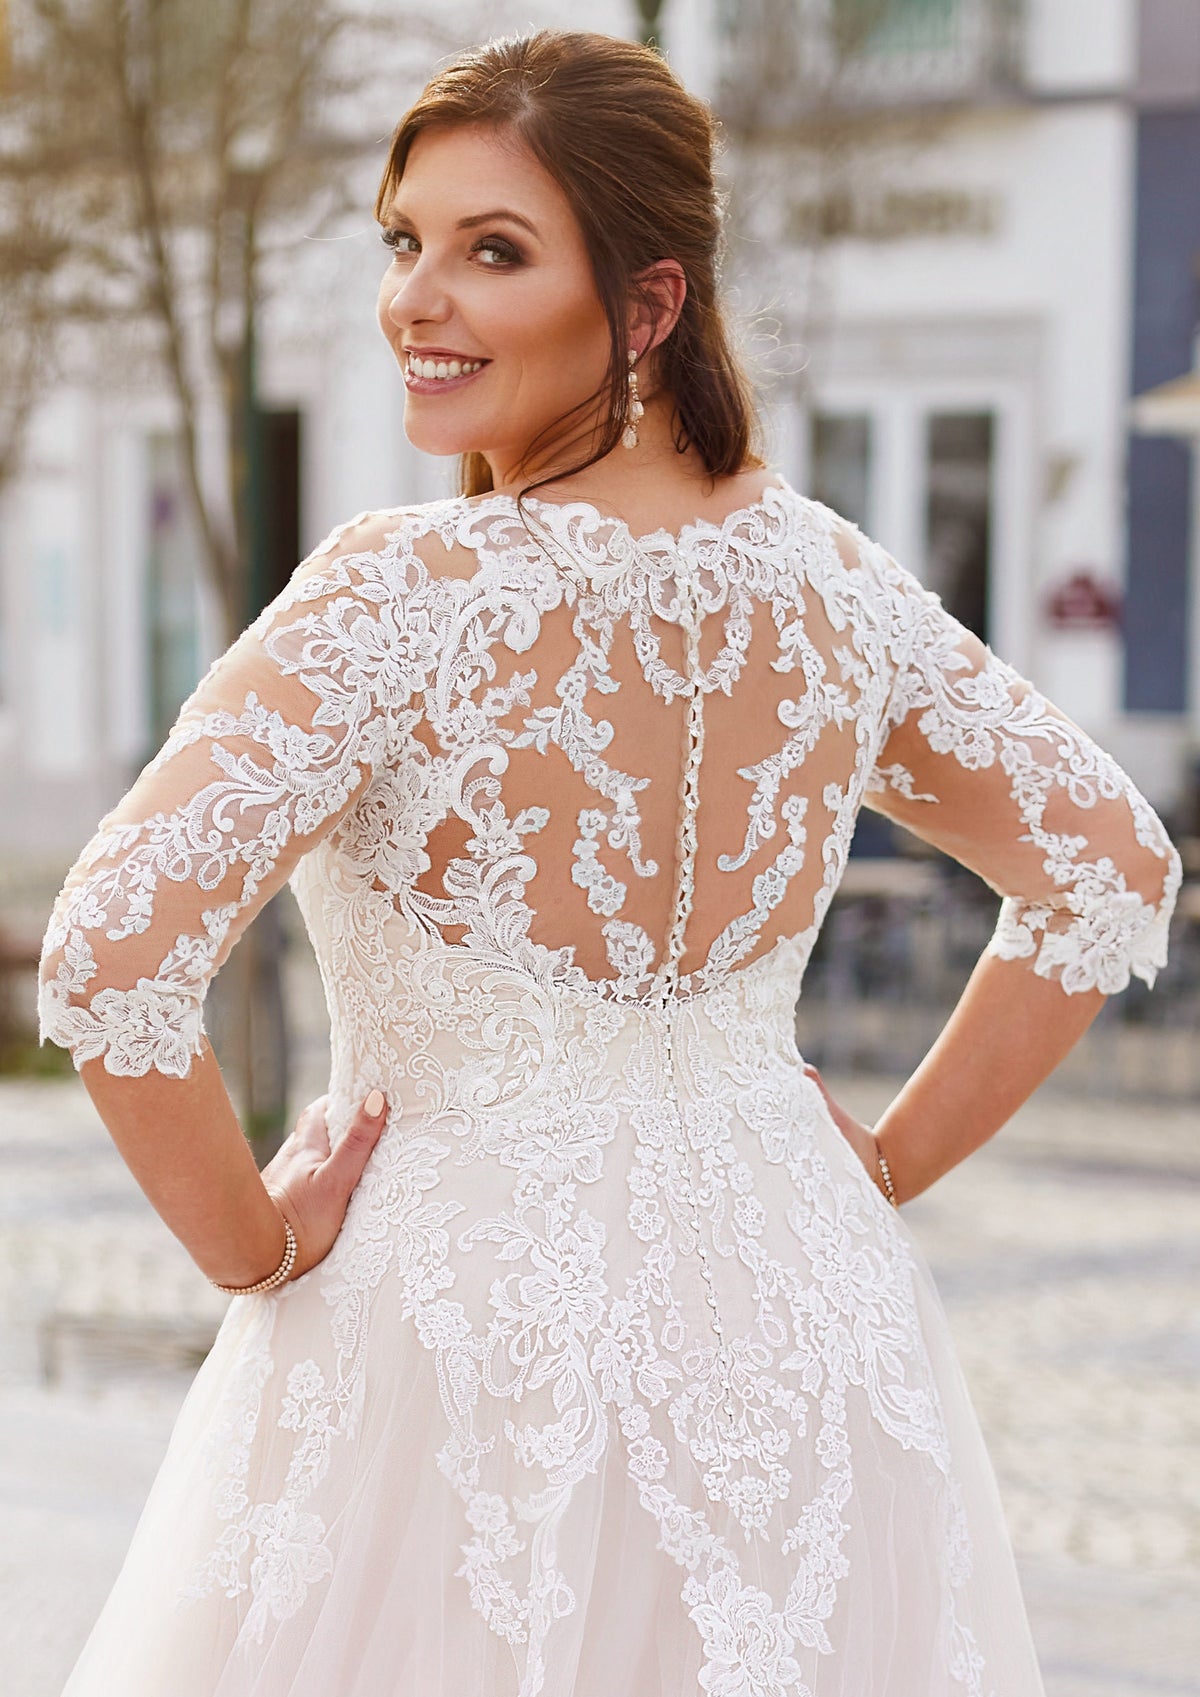 Romantic Elegant Aline Wedding Dress Bridal Gown Illusion Lace Sweetheart Neckline 3/4 Sleeves Corset Back Plus Size Tattoo Lace Tulle Skirt